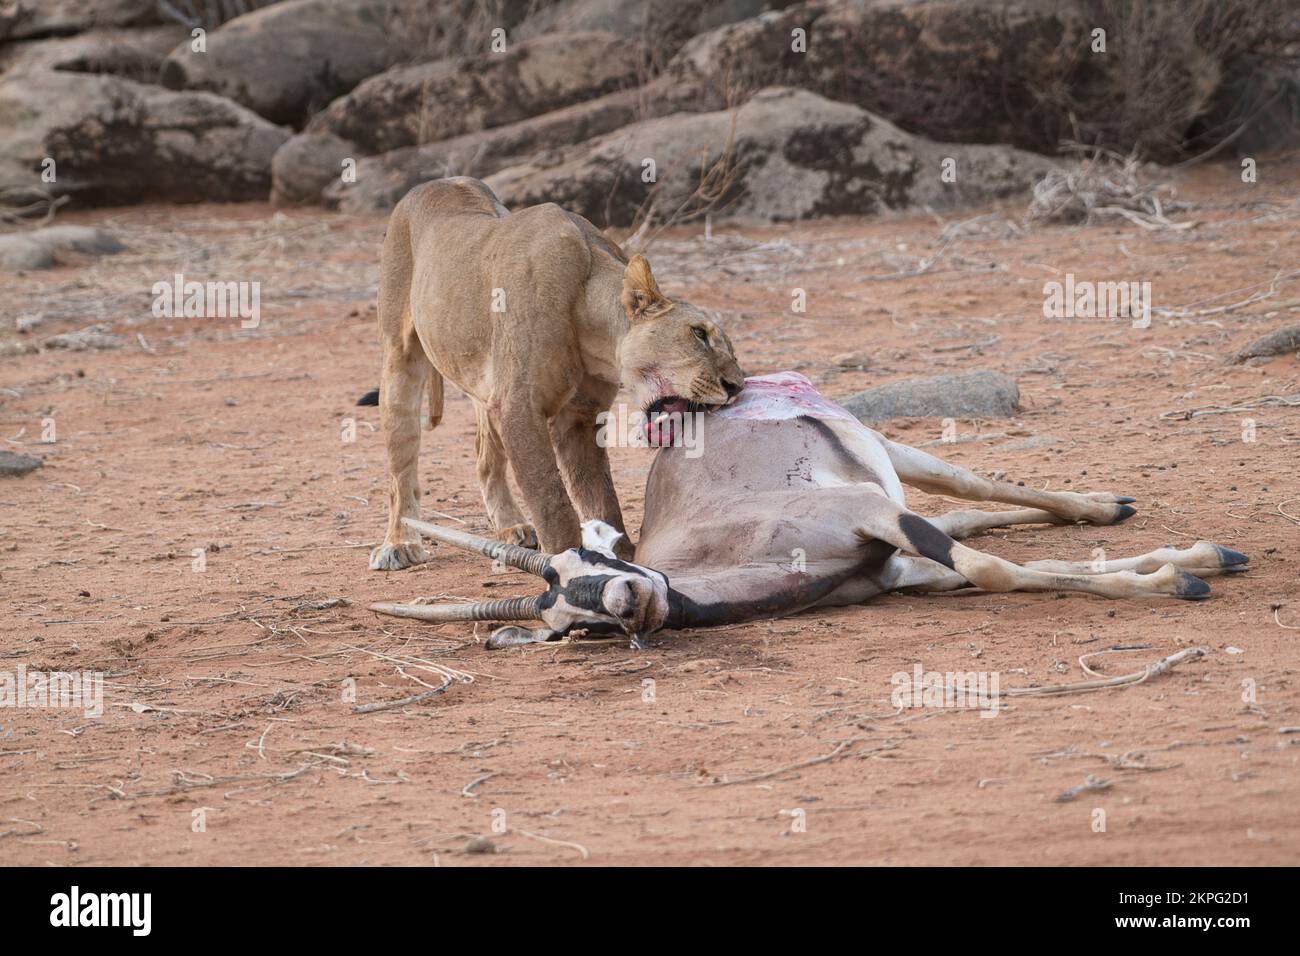 A young lion (Panthera leo) attempting to open the carcass of a beisa oryx antelope killed by another member of the pride. Stock Photo